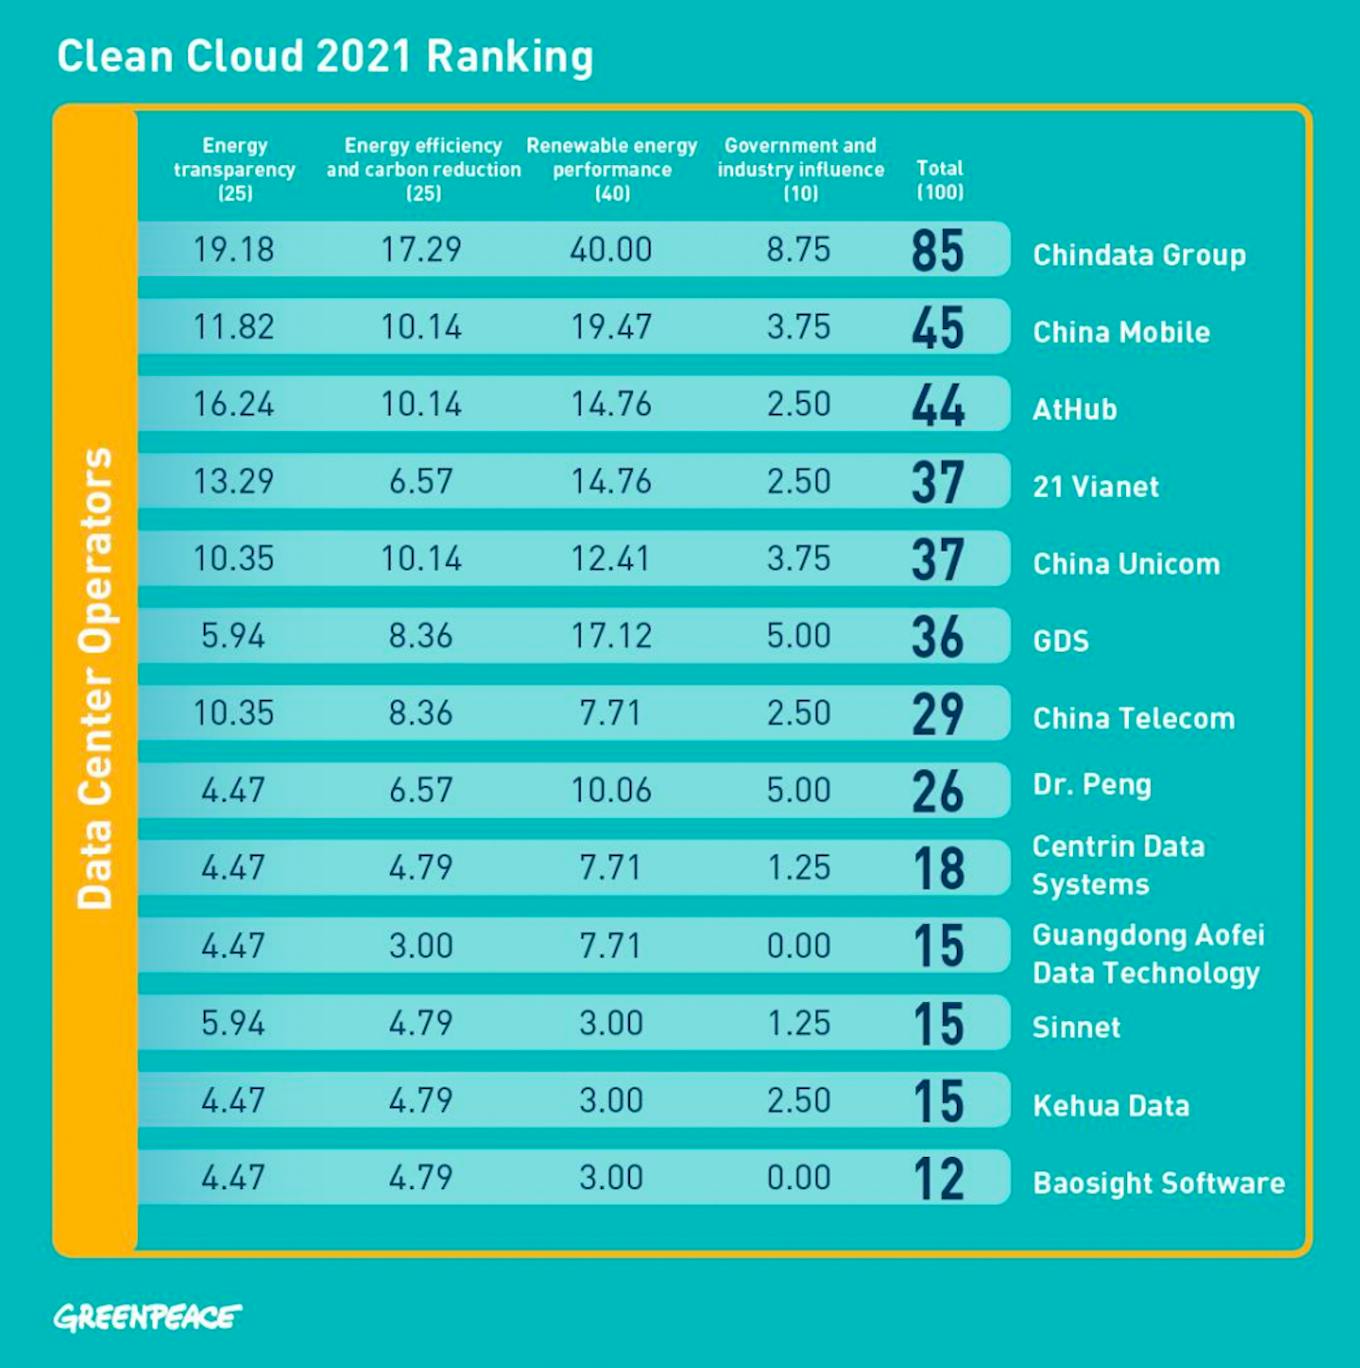 Chinadata rops the Clean Cloud Ranking for data centre companies. Source: Clean Cloud Ranking 2021